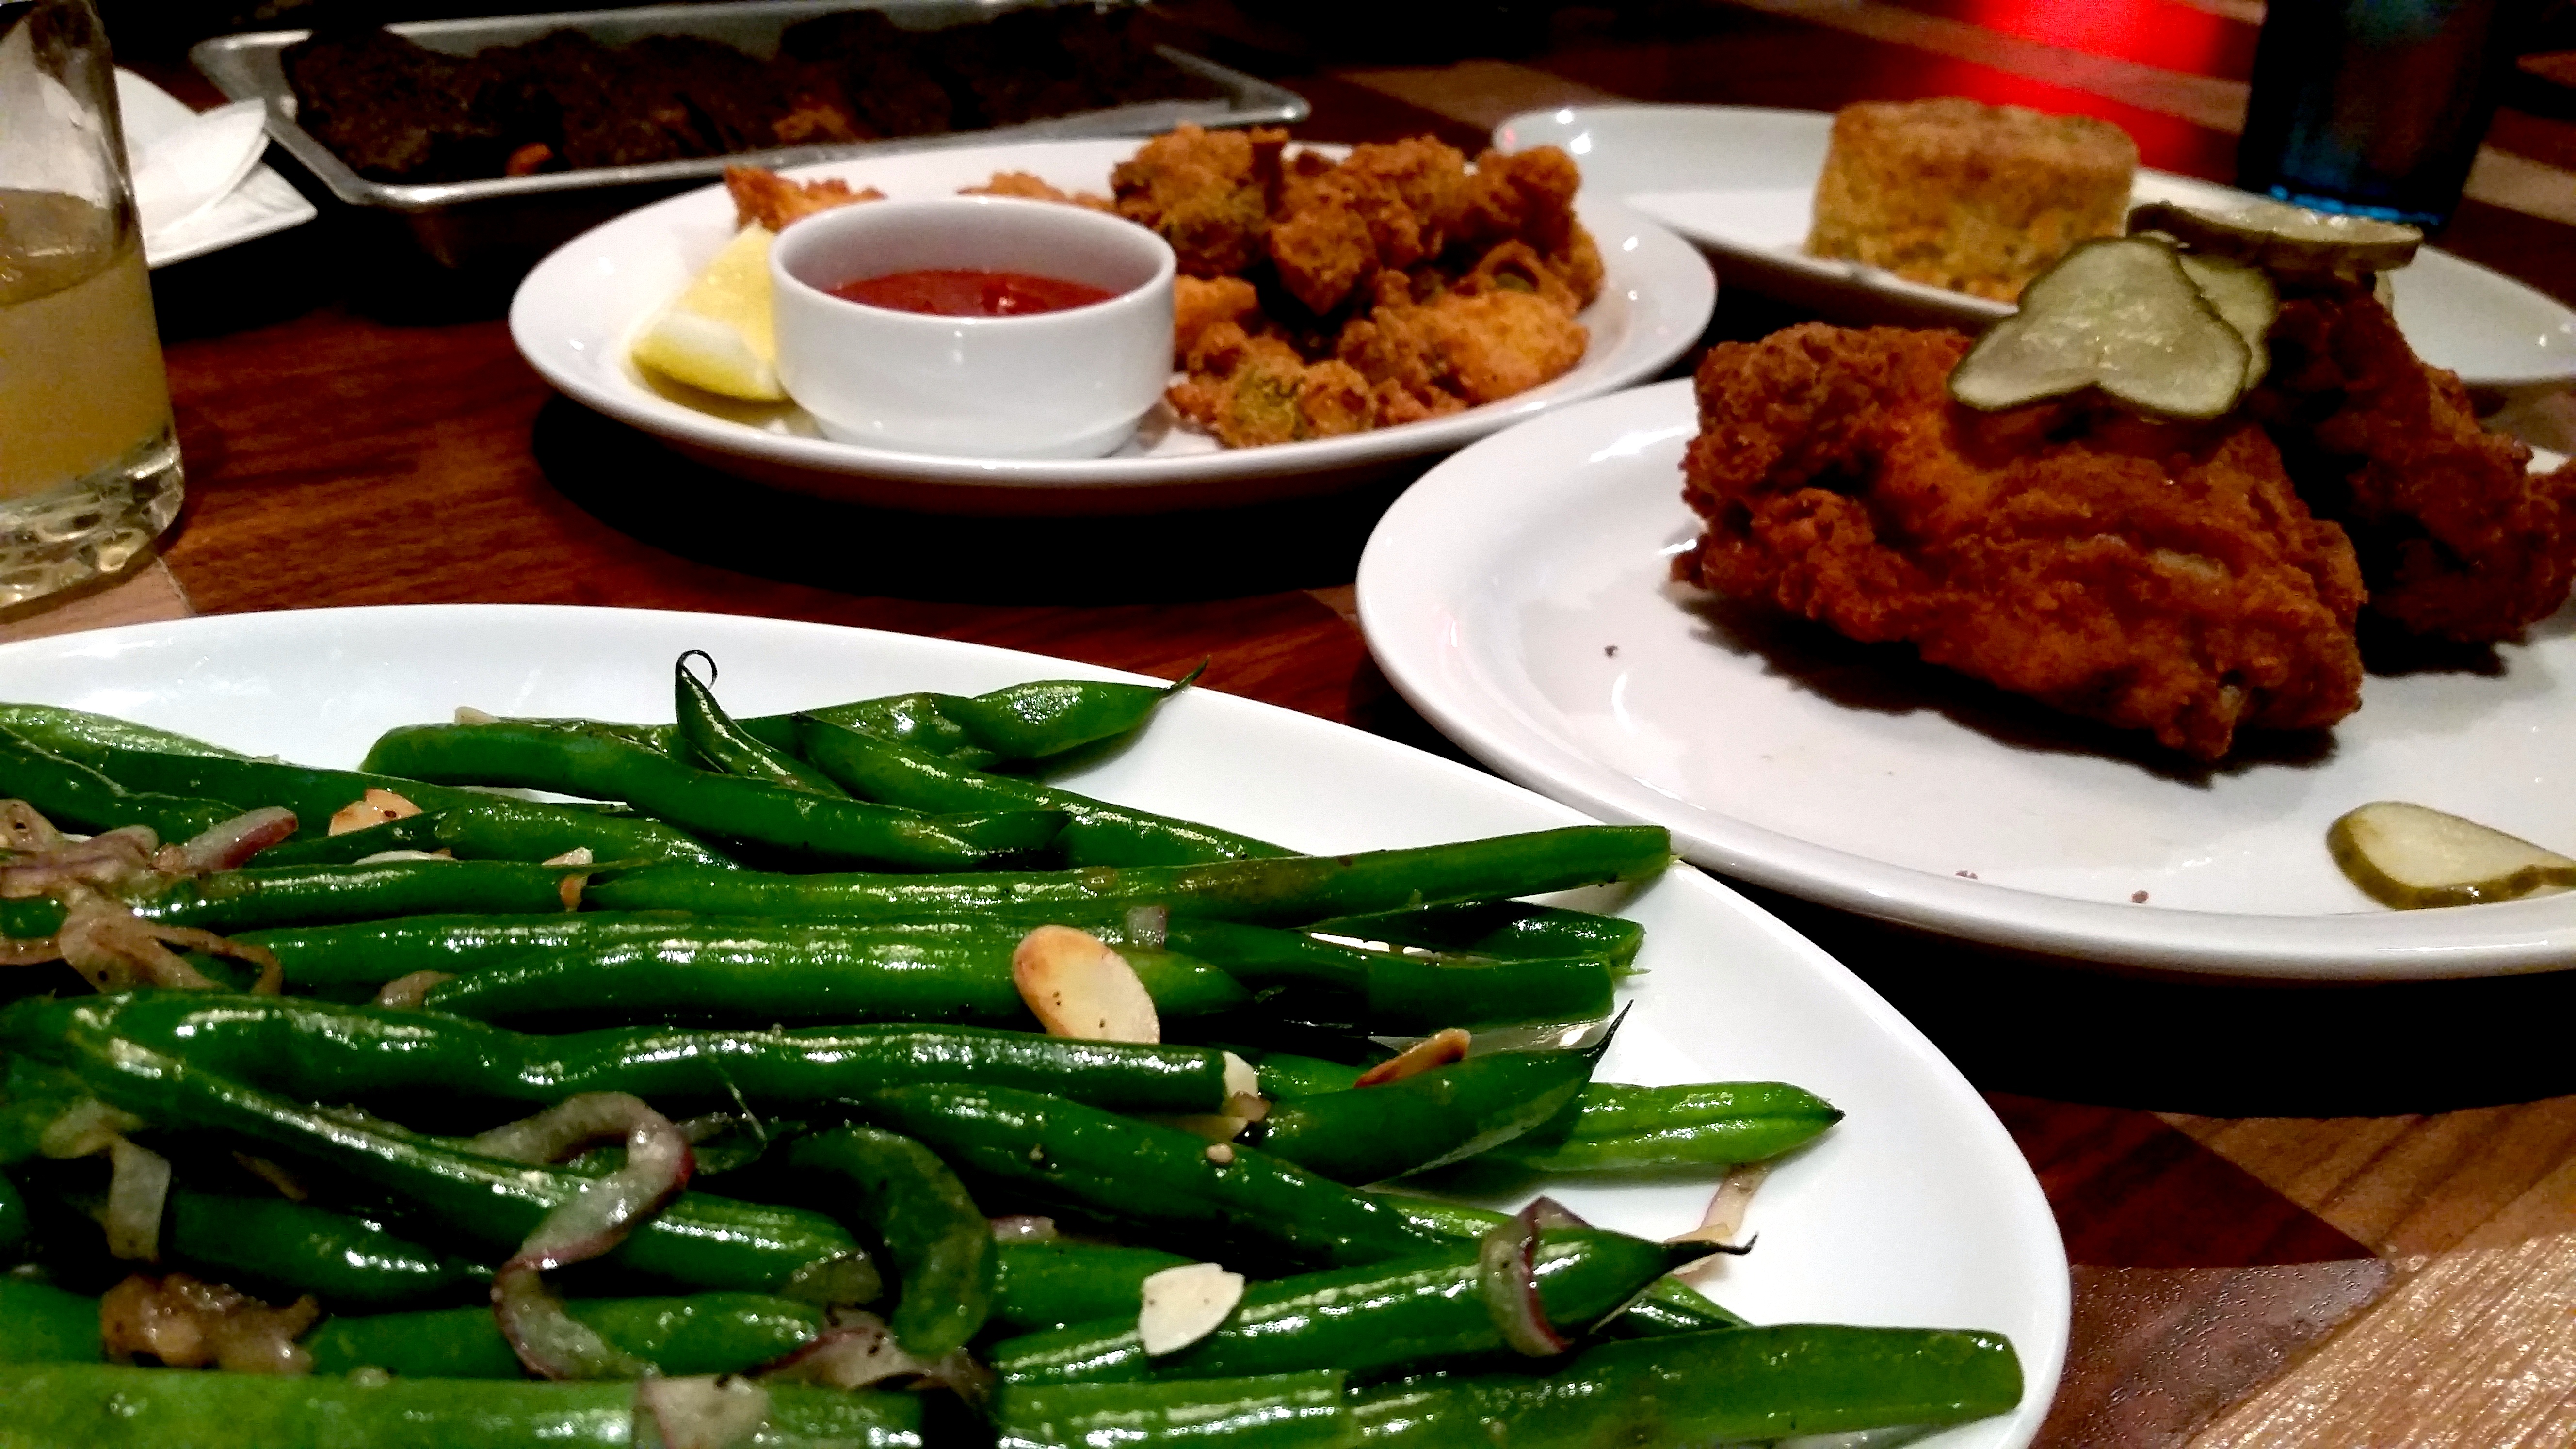 Green beans, chicken, gator bites, and biscuit plates